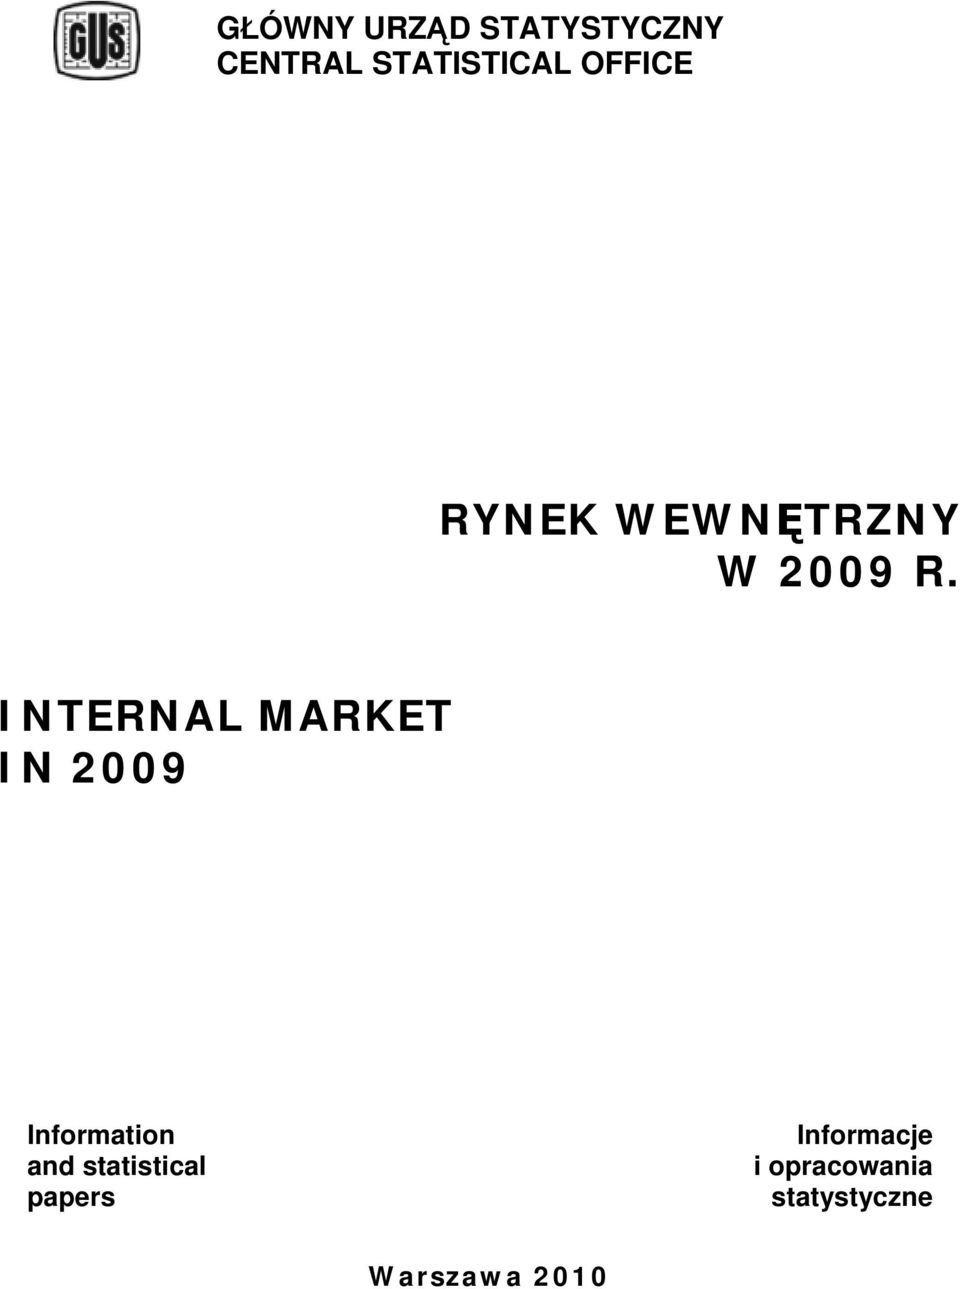 INTERNAL MARKET IN 2009 Information and